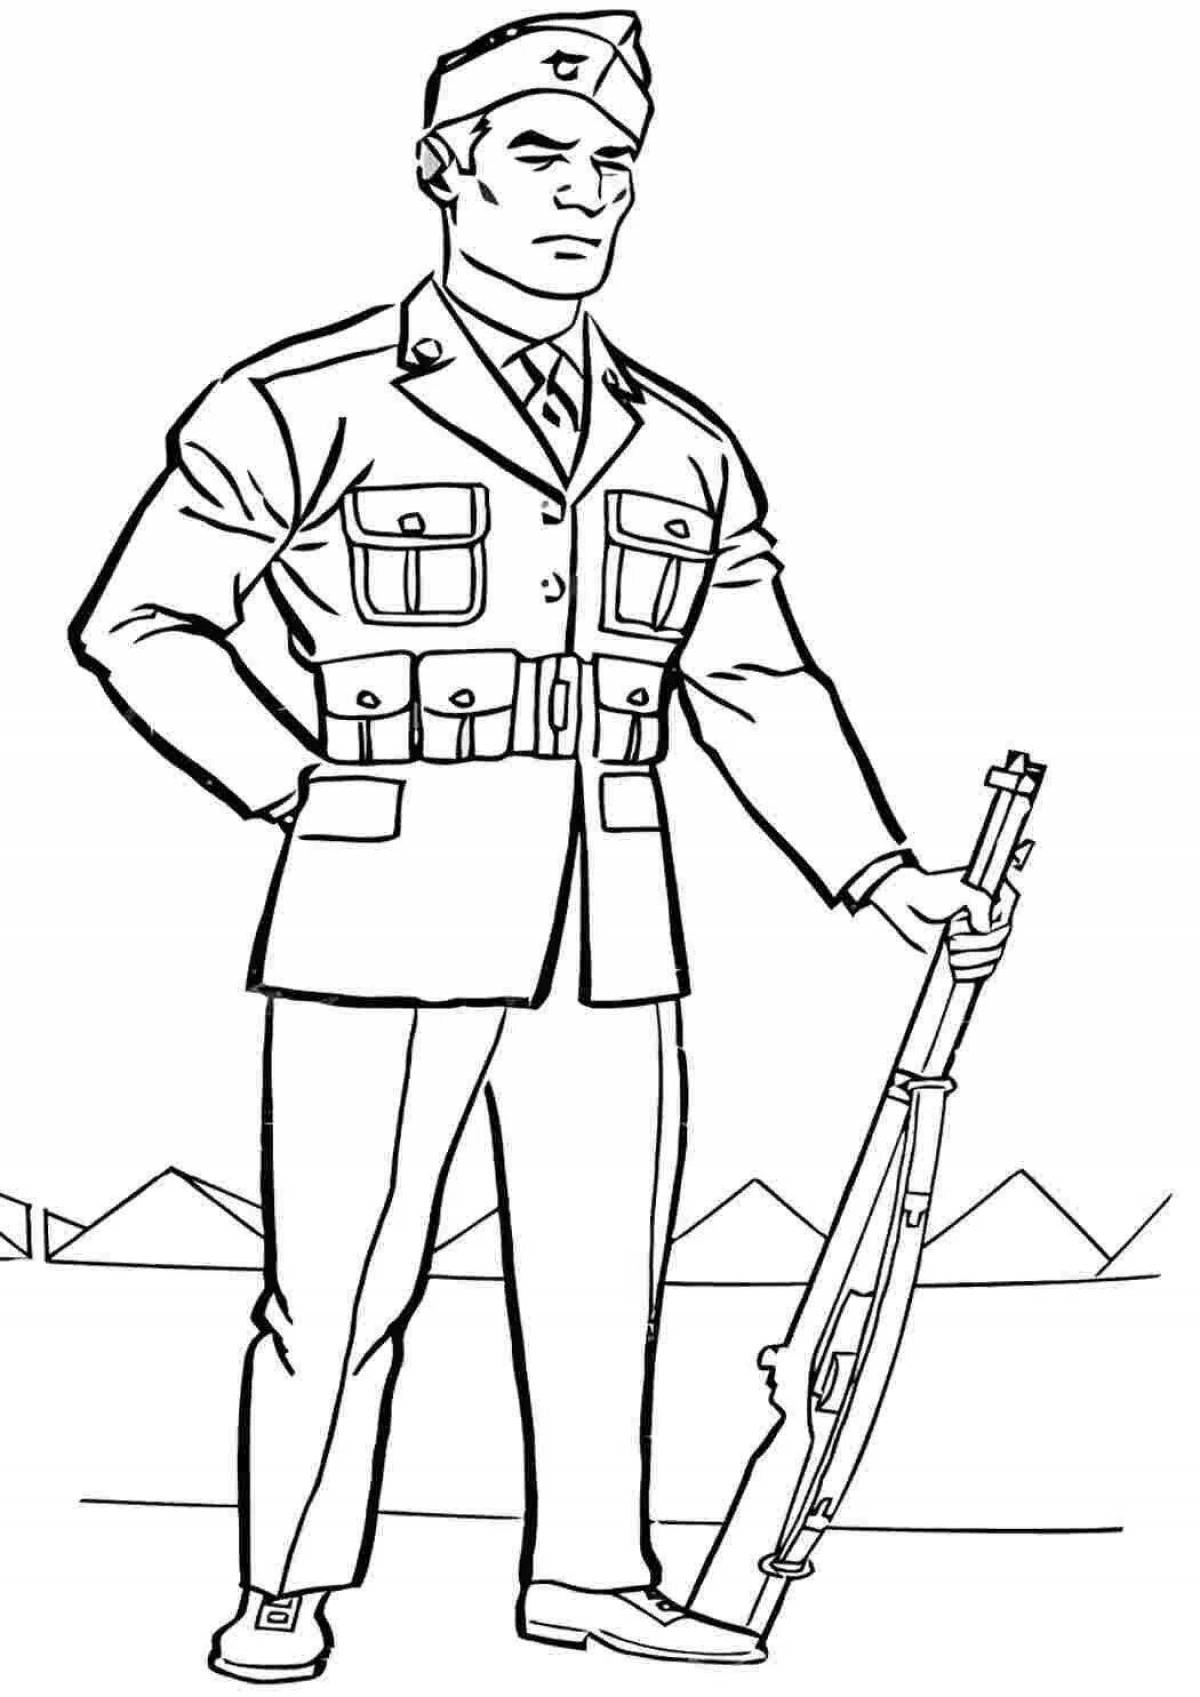 Heroic military coloring pages